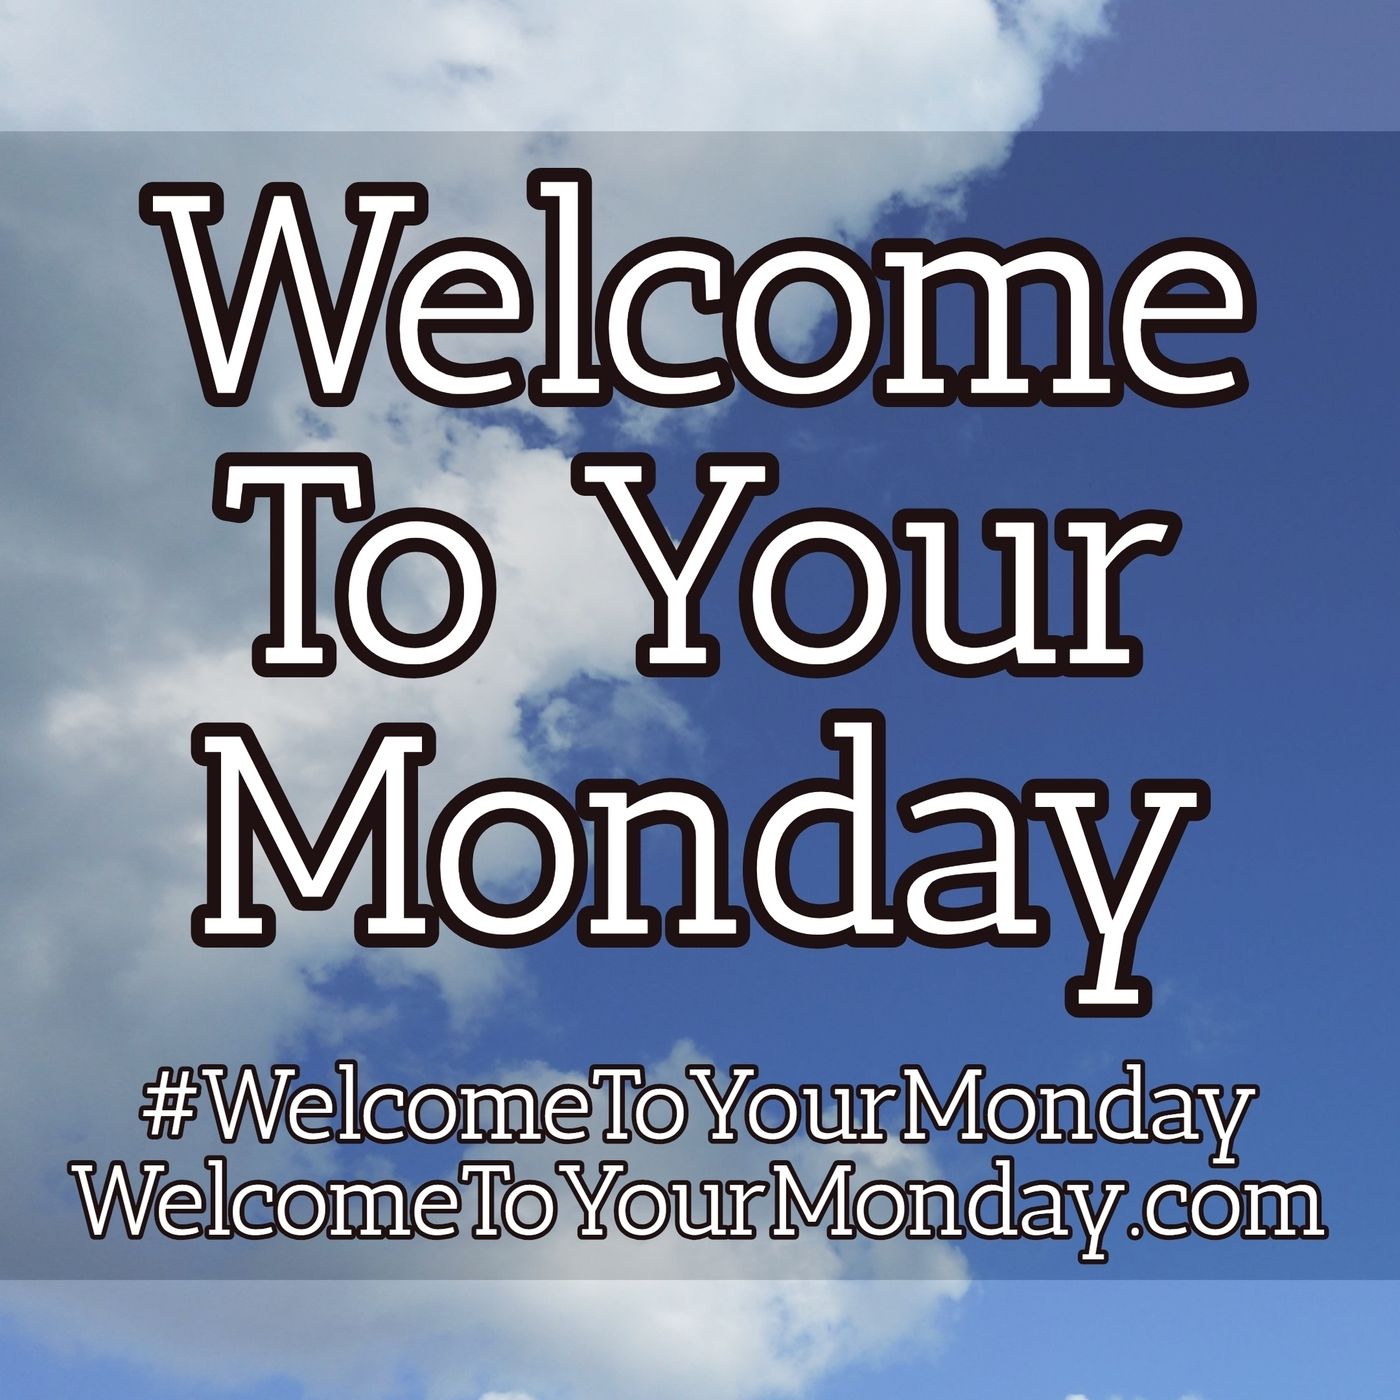 Welcome To Your Monday Message for 9/24/2018